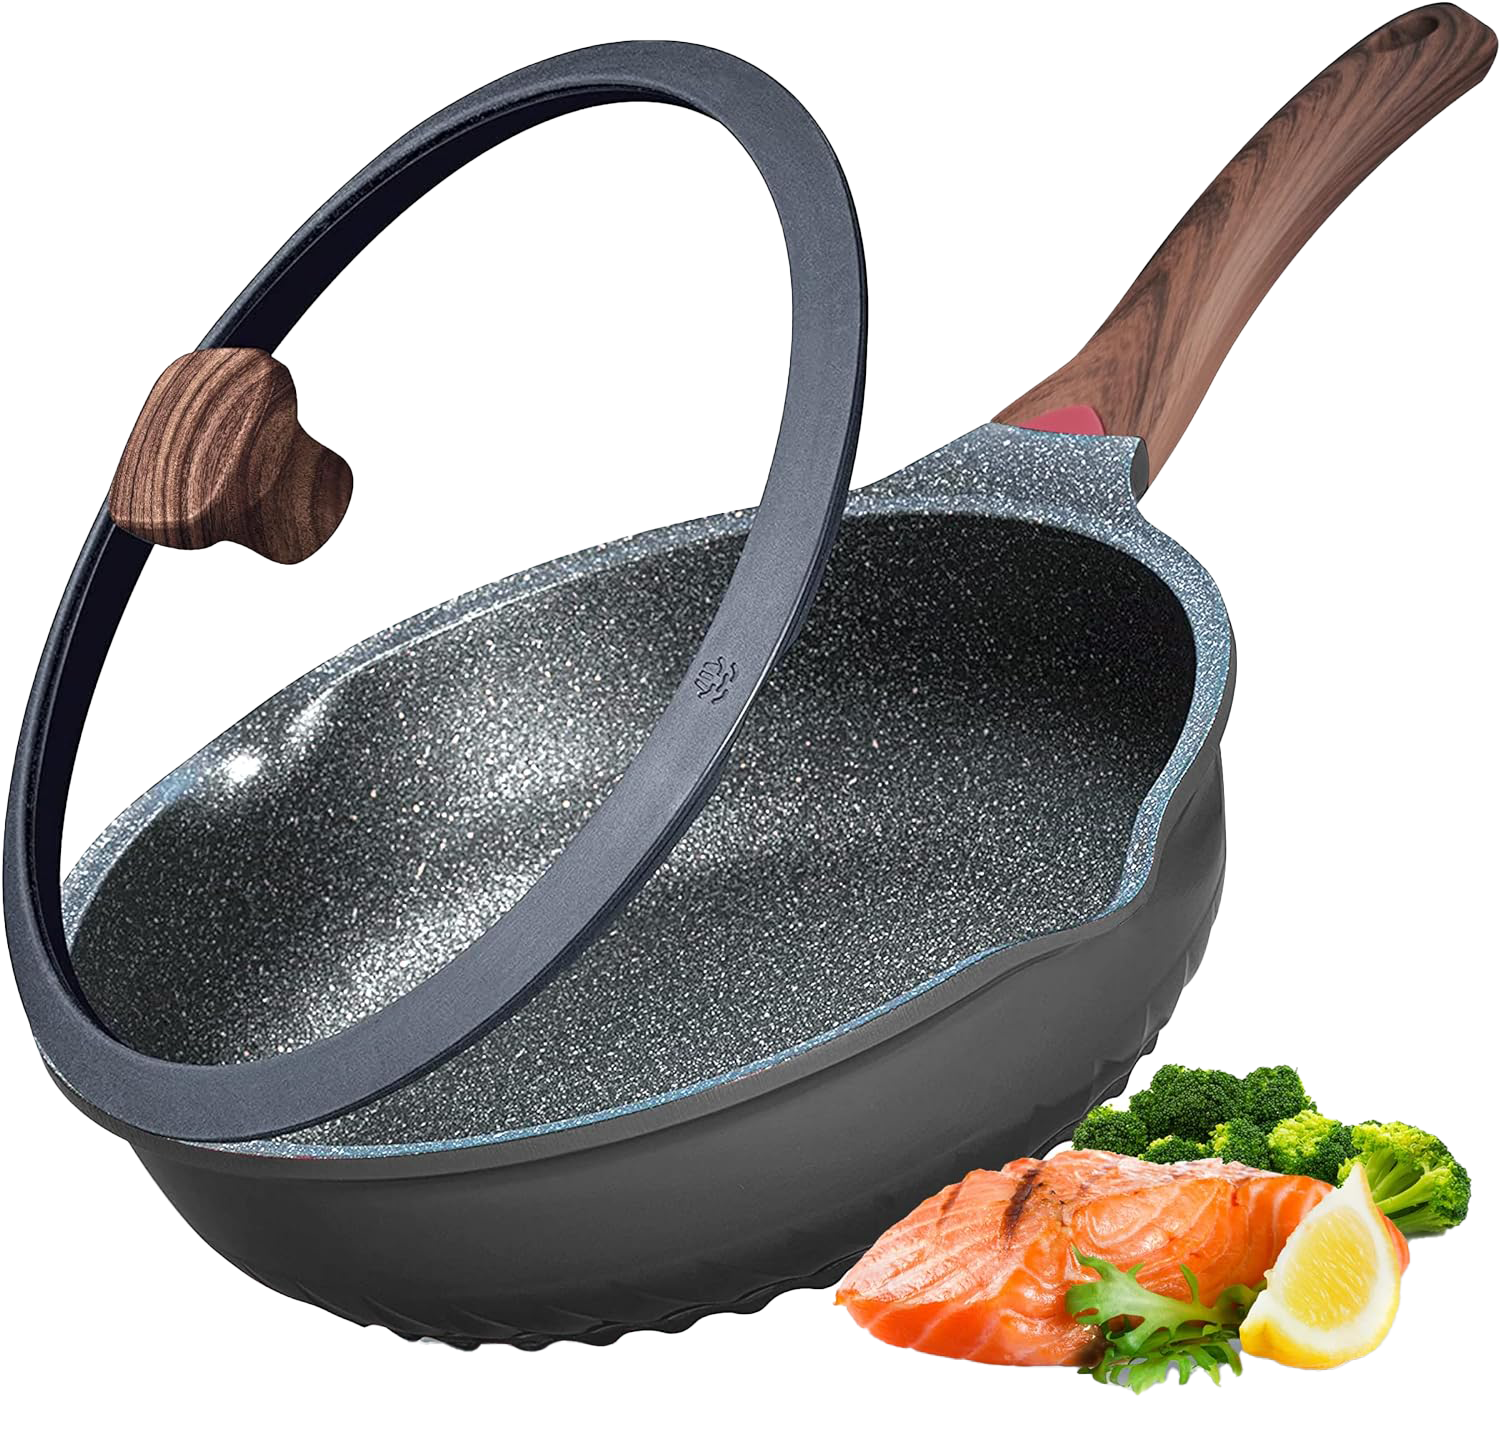 Vinchef – Pioneering Excellence in Cookware